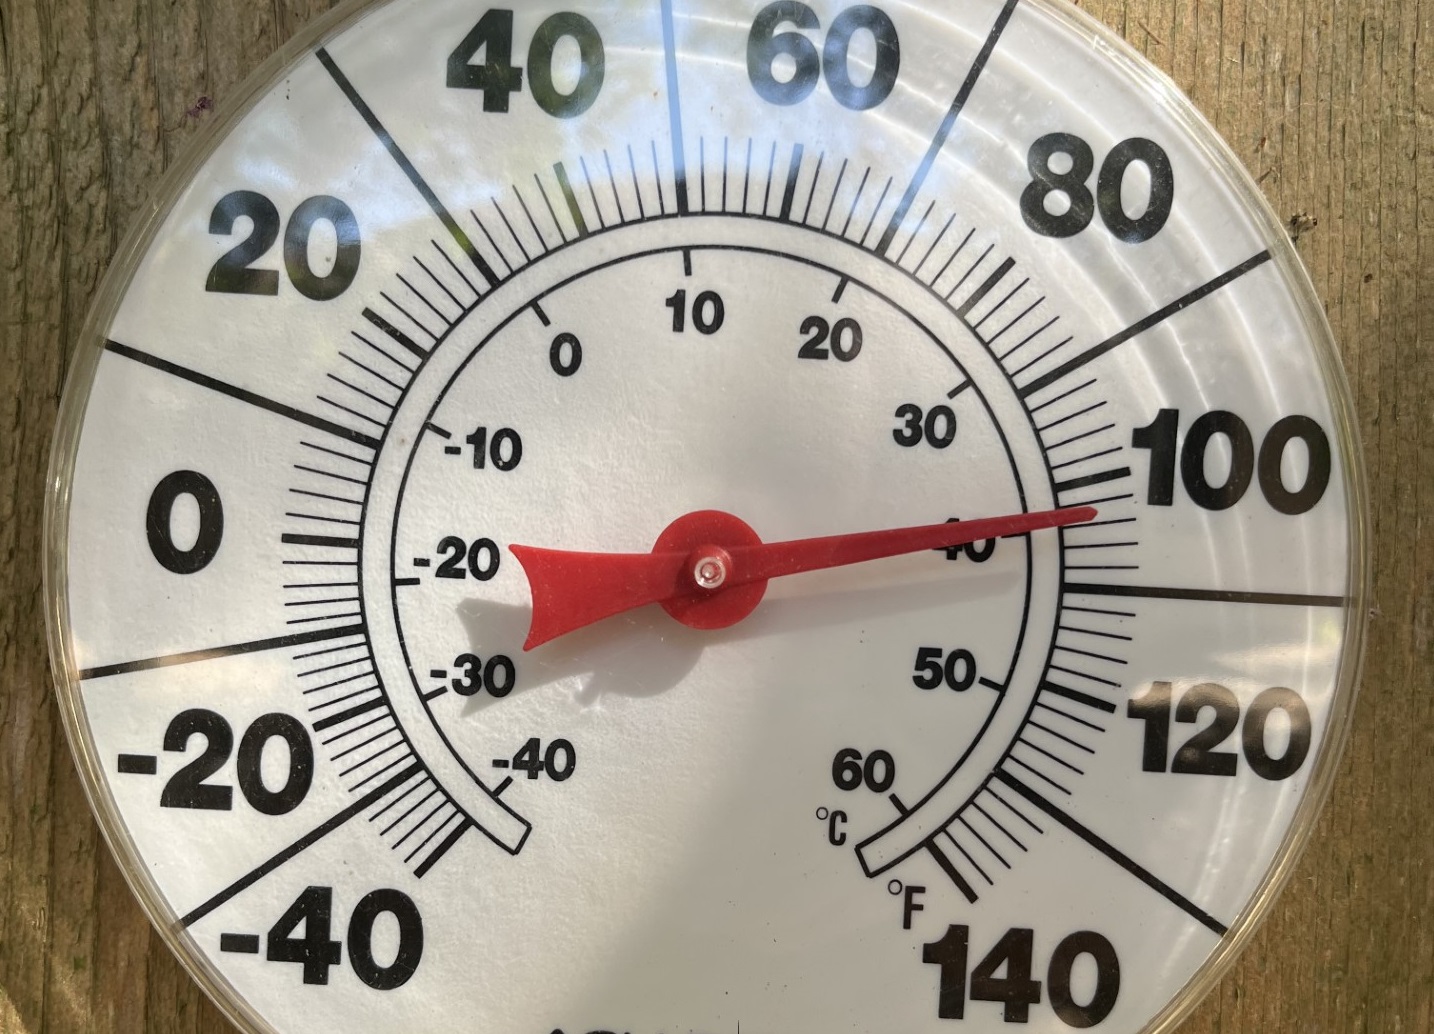 A thermometer shows temperatures above 100° in Shady Hollow on July 13, 2023. (KXAN Viewer Photo)